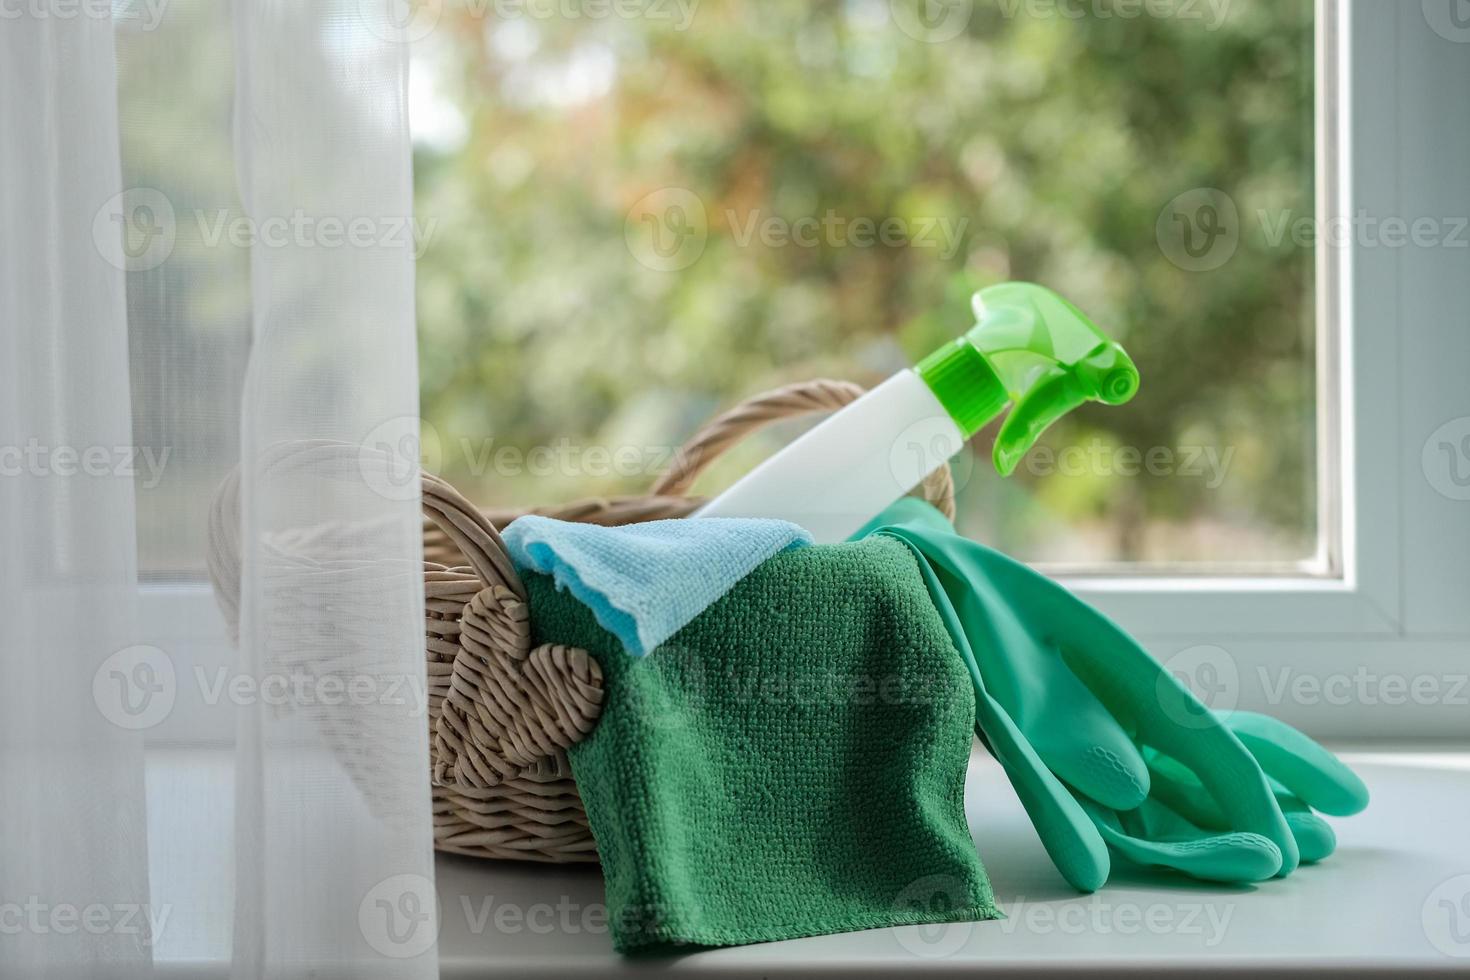 Cleaning agent, wipes and rubber gloves in a basket on the windowsill. General cleaning concept photo